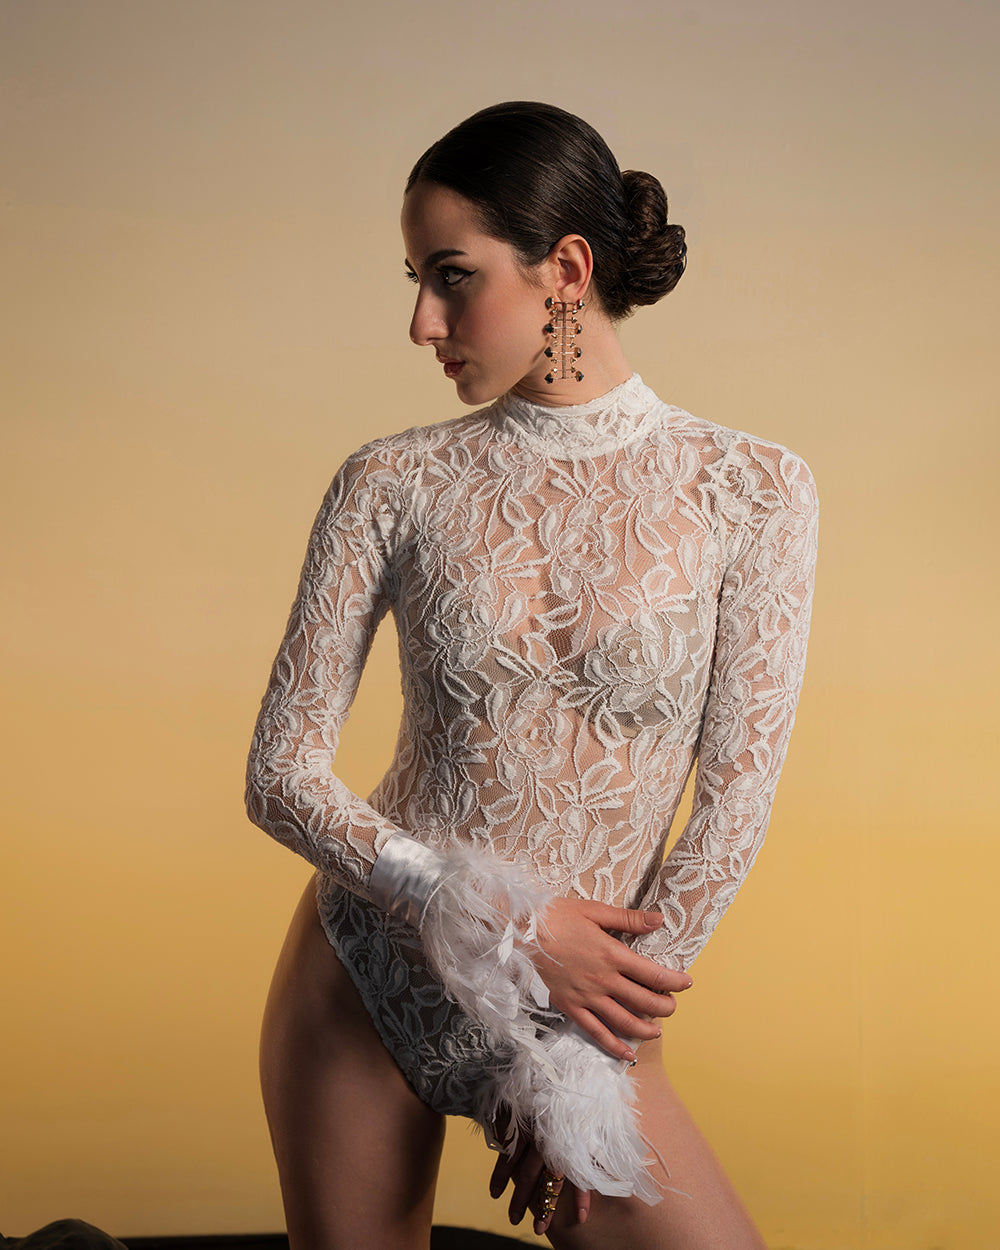 White lace Bodysuit Without Fur Hand Cuffs